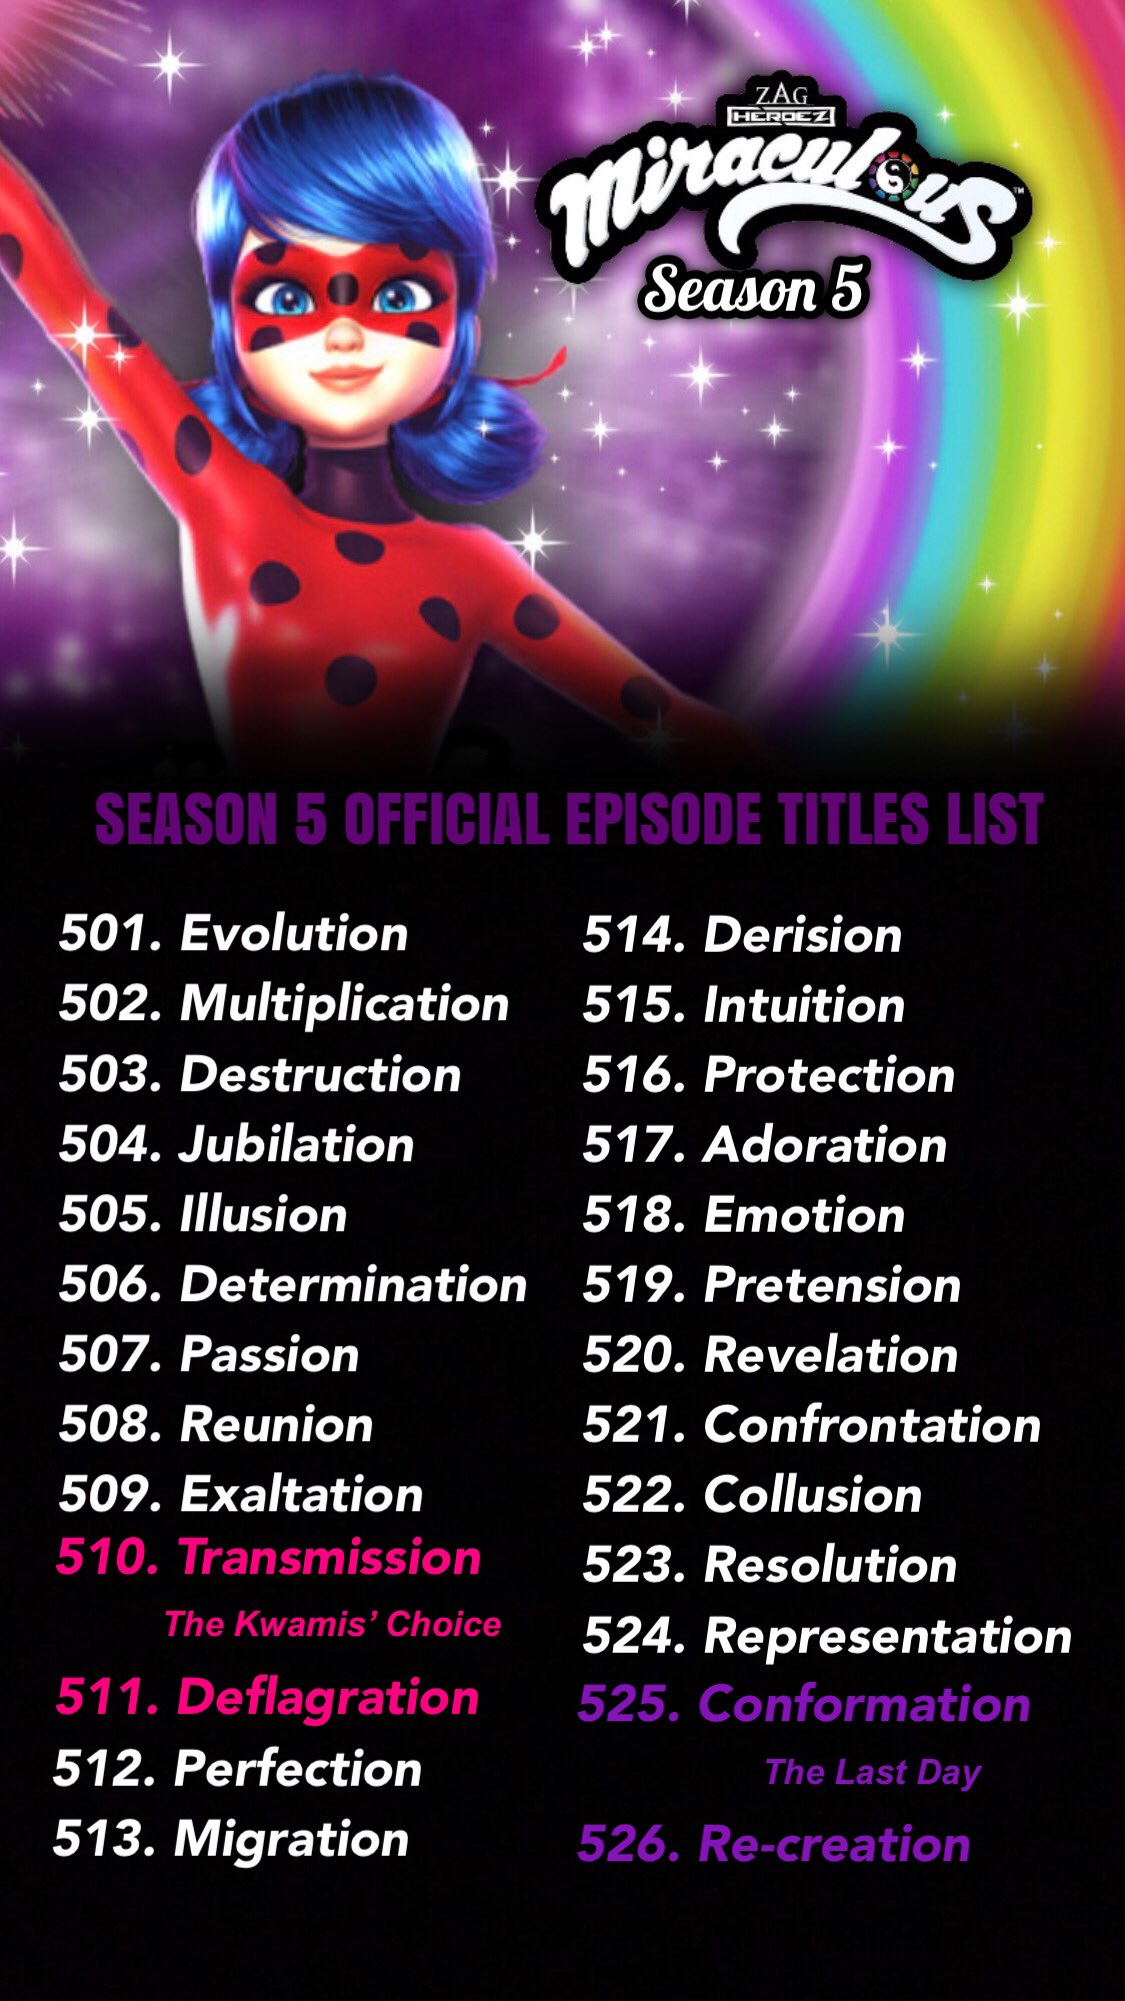 Miraculous Ladybug Blog on X: 🐞LIST OF OFFICIAL SEASON 5 EPISODE TITLES🐞  New design ✨ - 2 part episodes: (510 & 511 “The Kwamis' Choice) (525 & 526  “The Last Day) #Miraculous #